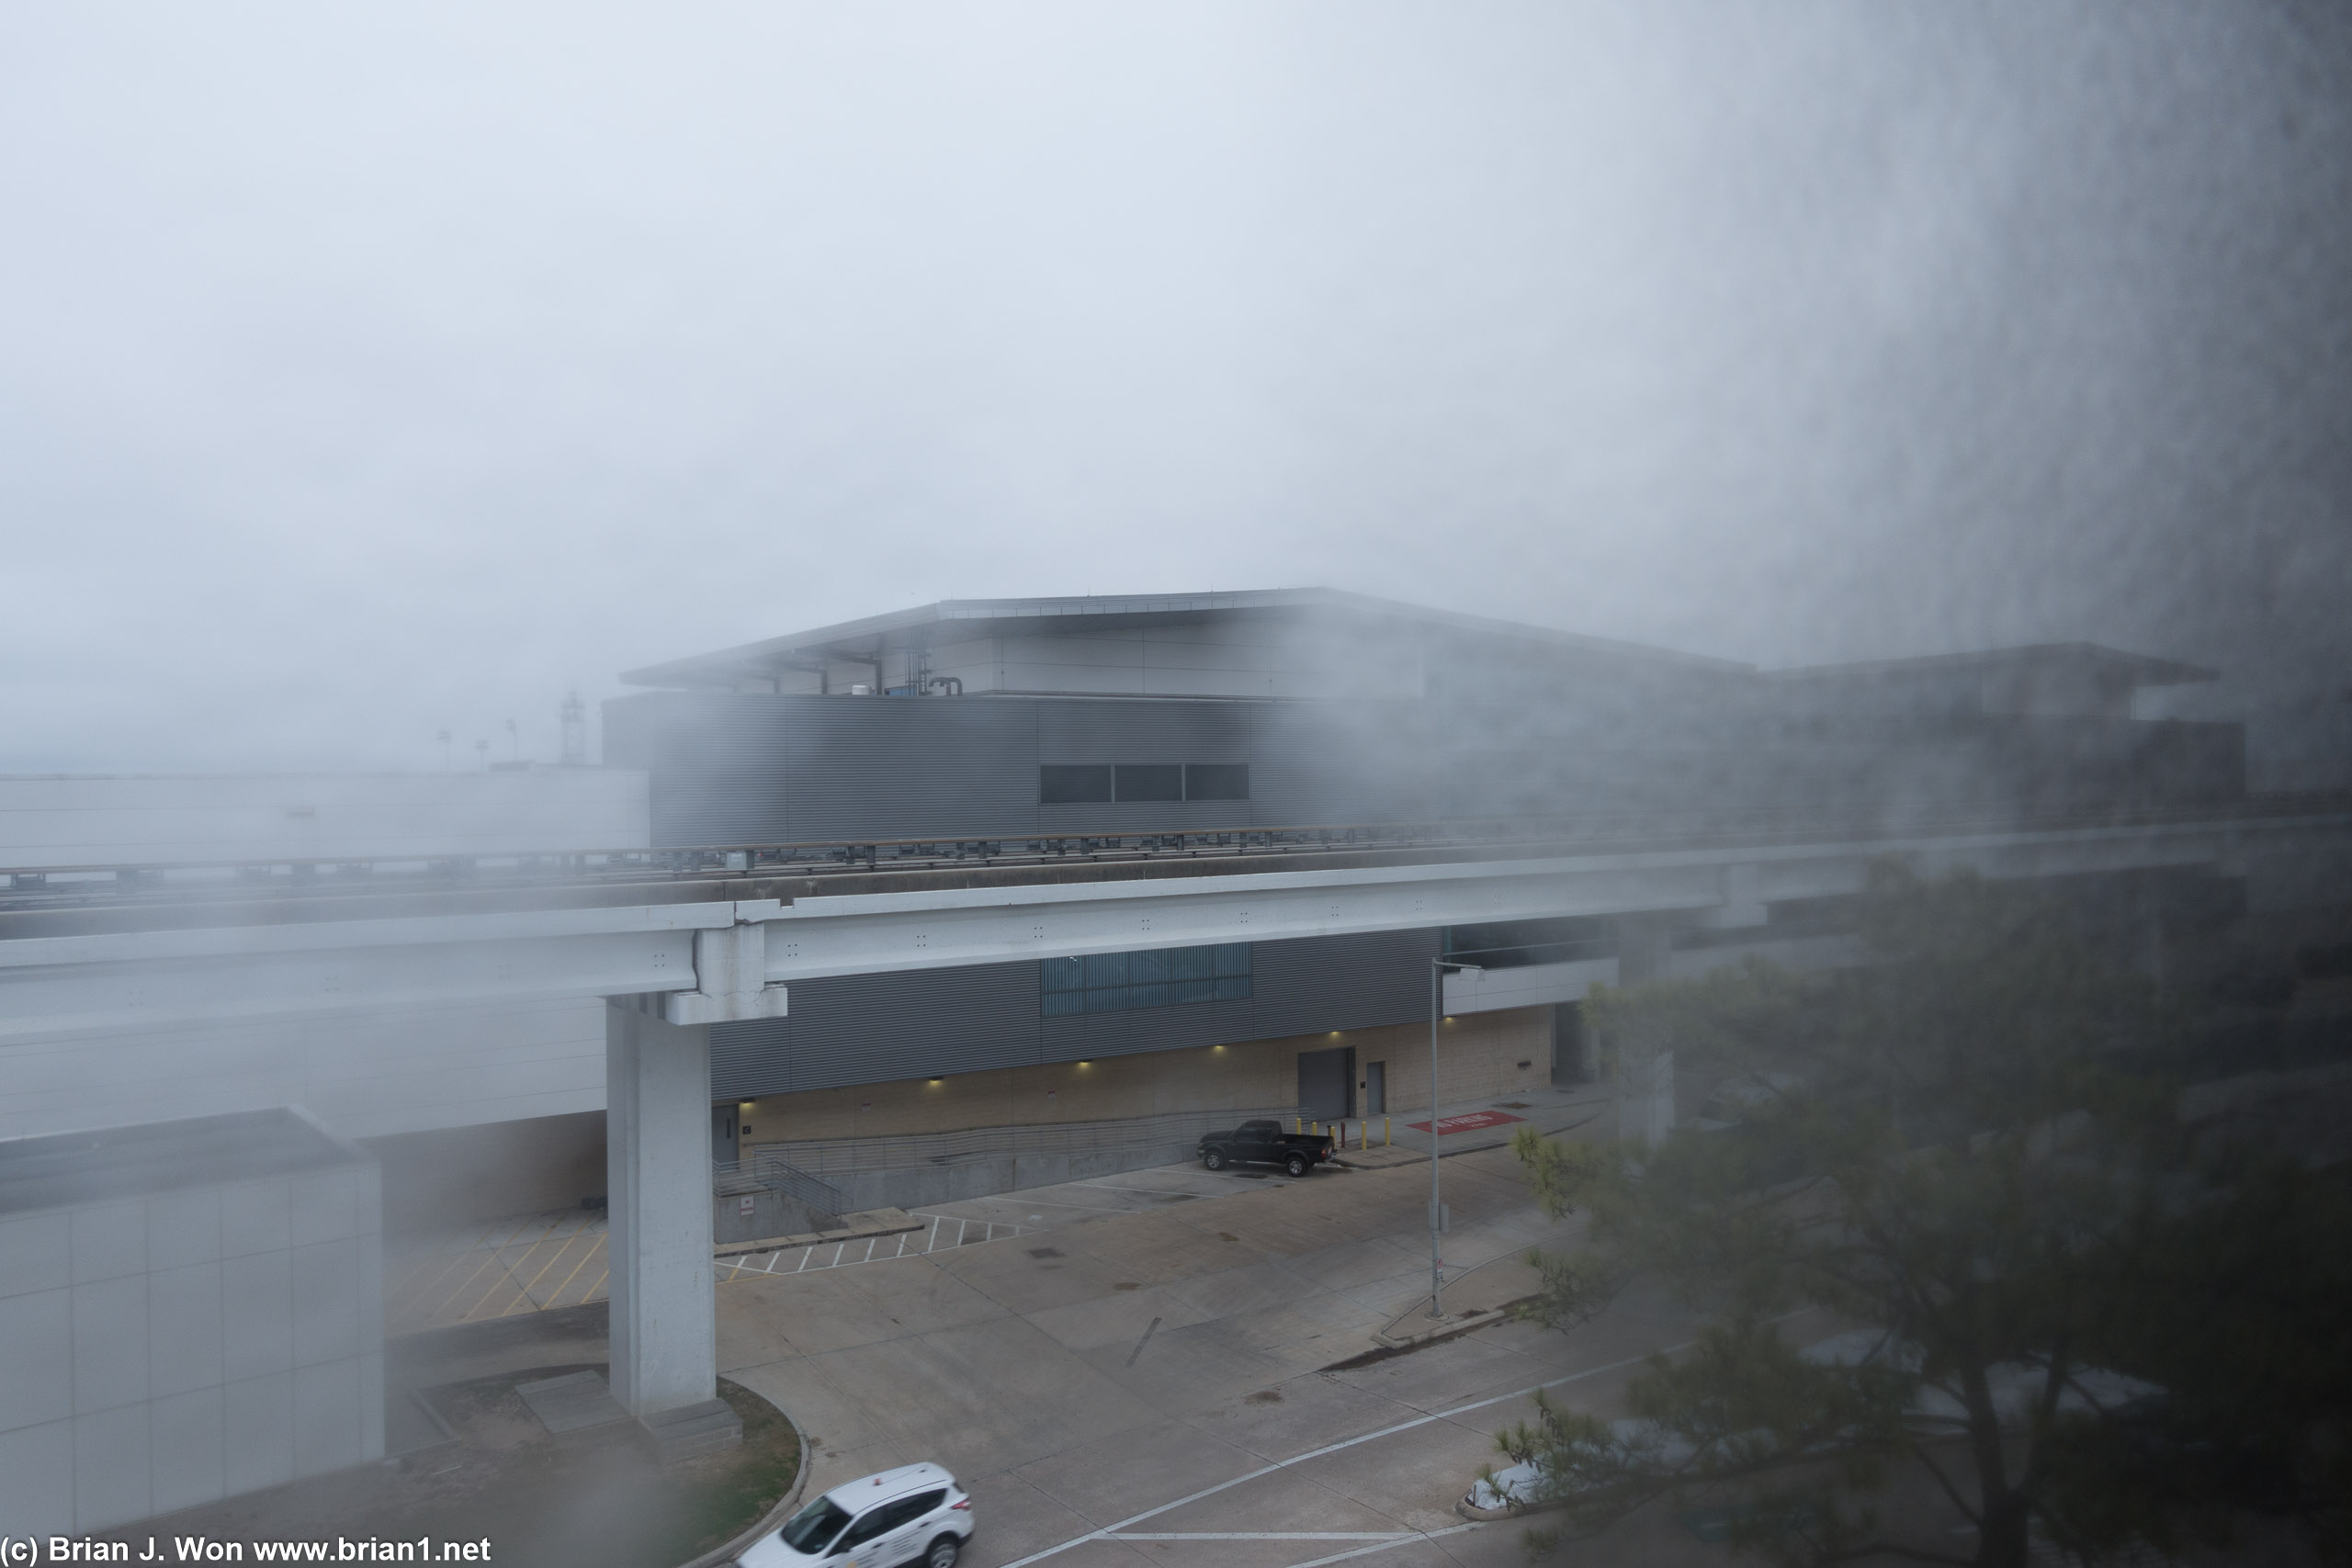 Rainy day and not much of a view from the Marriott at George Bush Houston Intercontinental Airport.